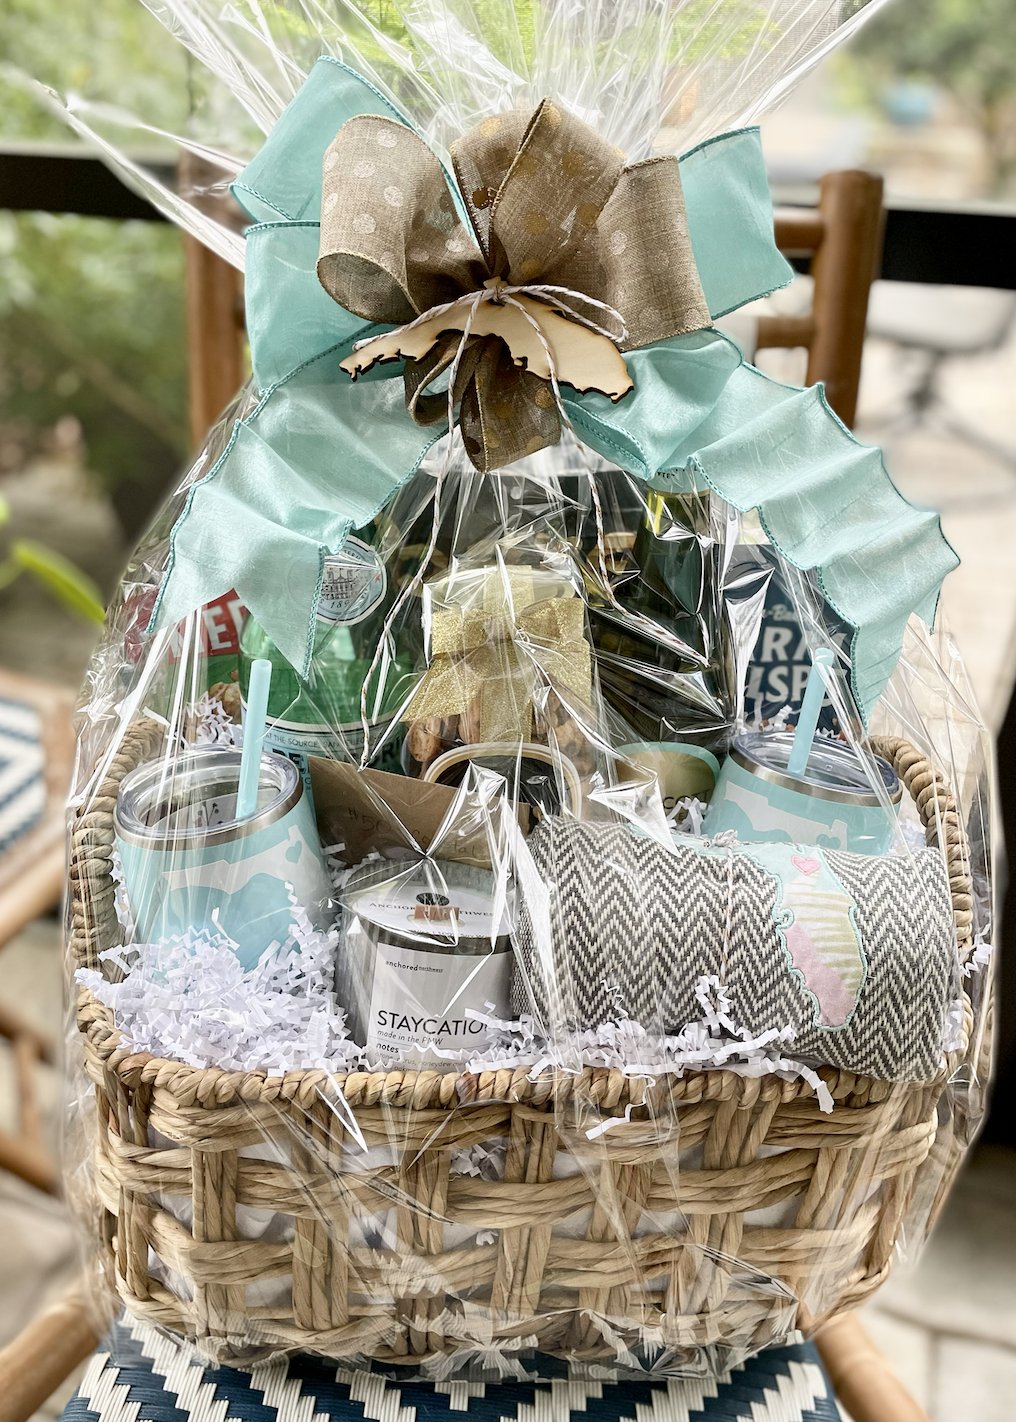 Pampered Chef - Favors & Gifts - Omaha, NE - WeddingWire